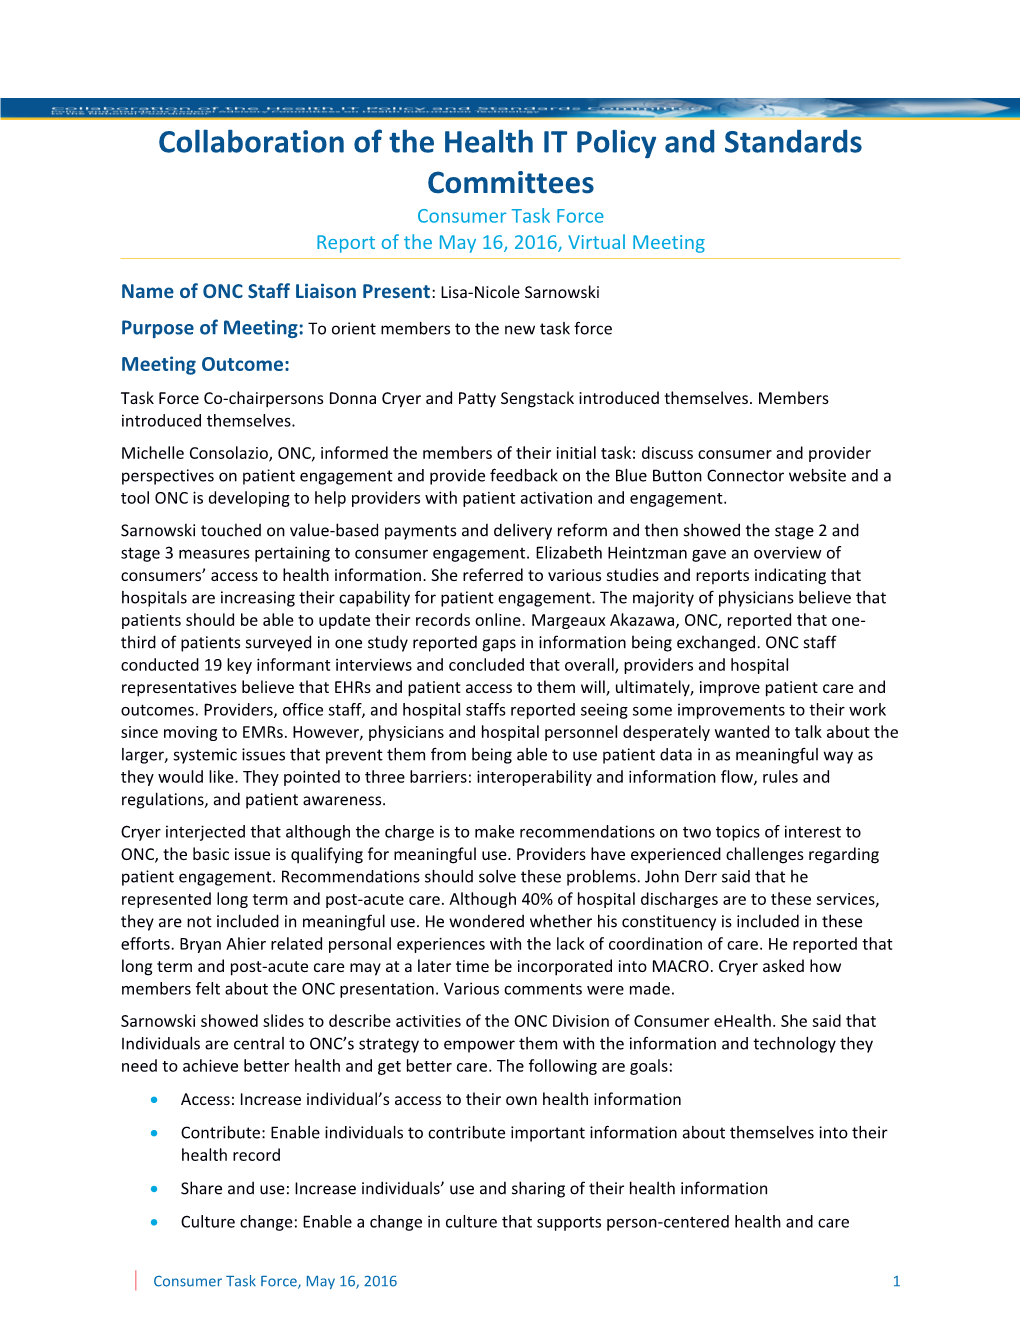 Collaboration of the Health IT Policy and Standards Committees